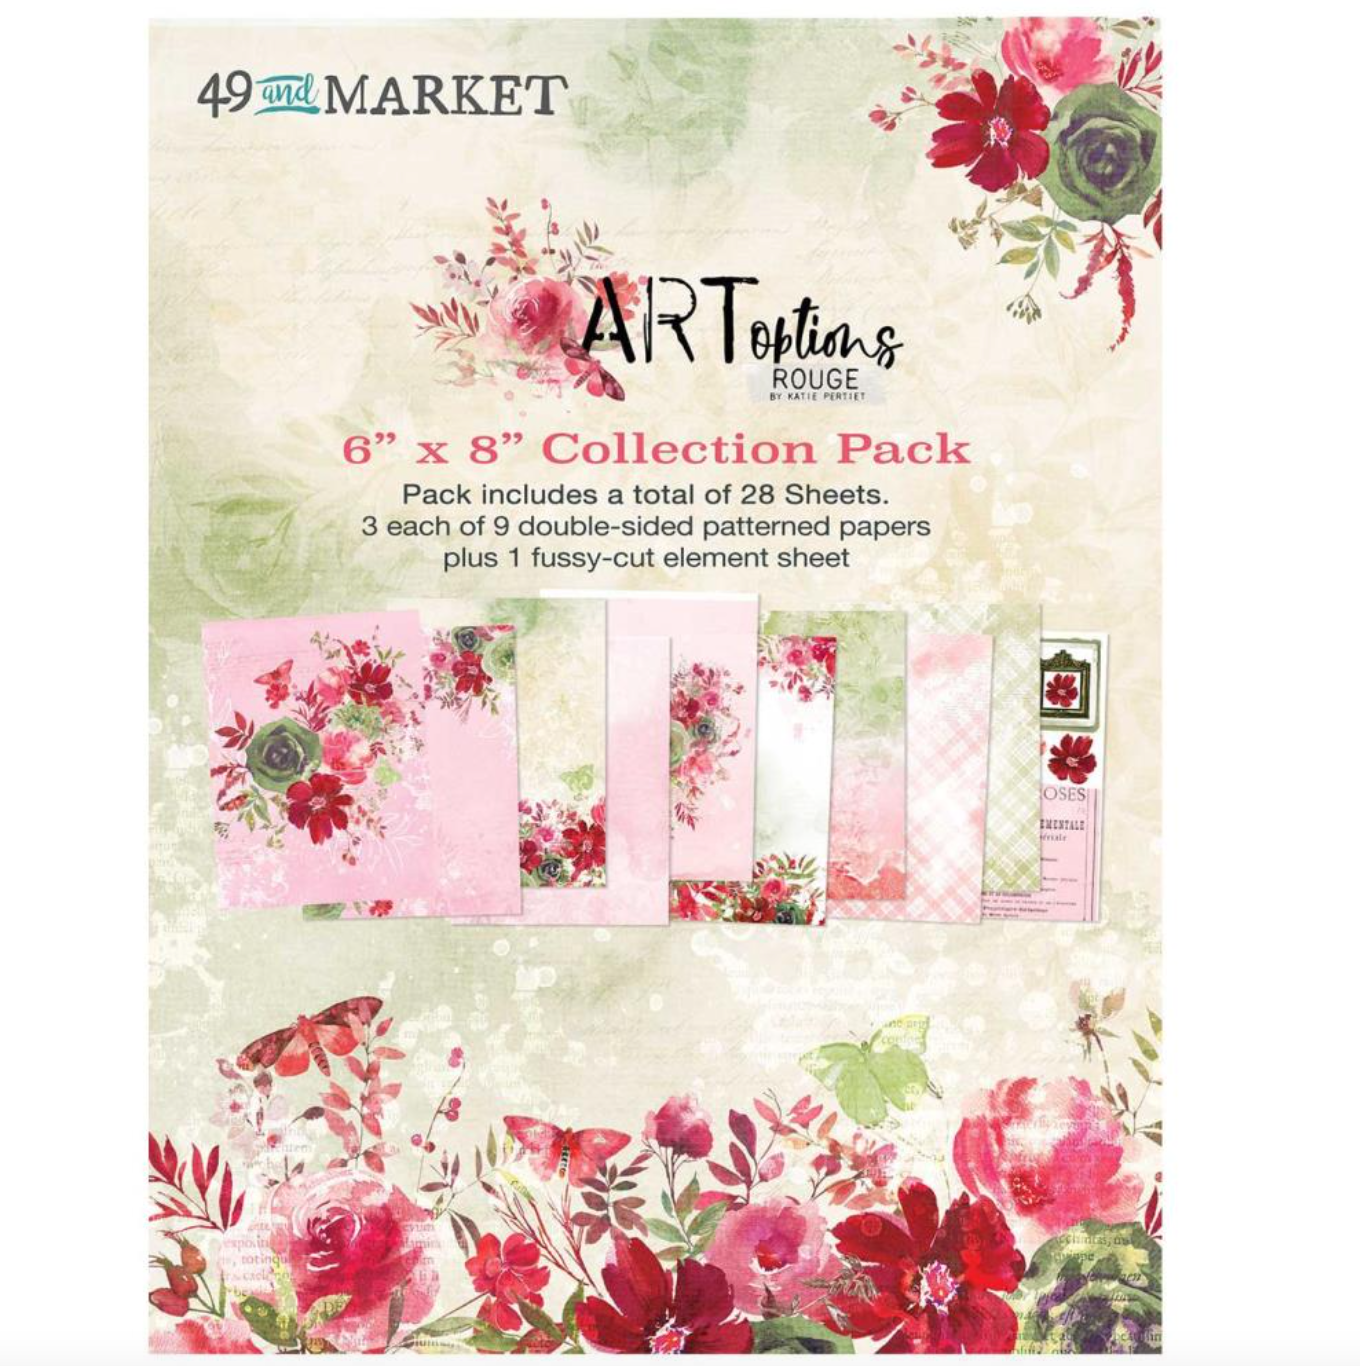 6x8 Inch - ART Options Rouge - 49 and Market